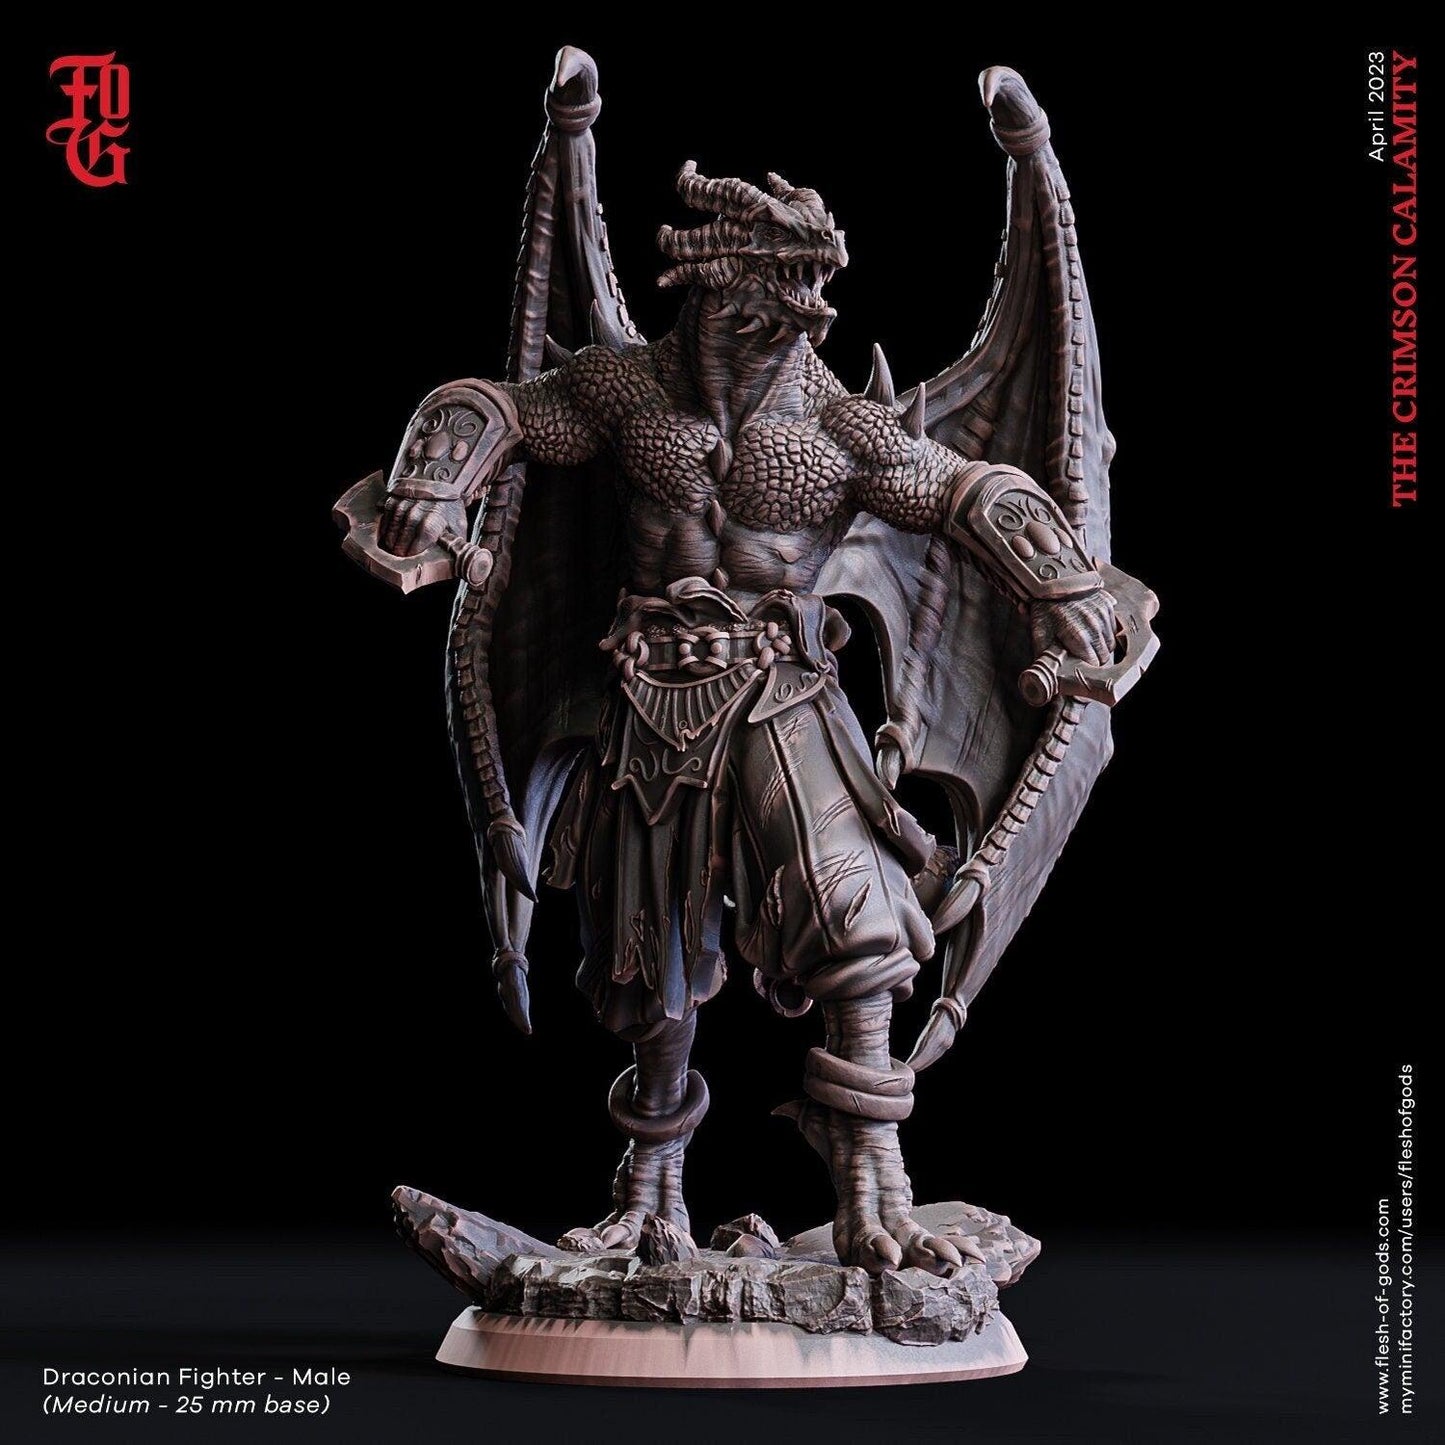 Male Draconian Fighter Miniature | 25mm Base | DnD Miniature Dungeons and Dragons DnD 5e Warrior Paladin Fighter Dungeons & Dragons - Plague Miniatures shop for DnD Miniatures